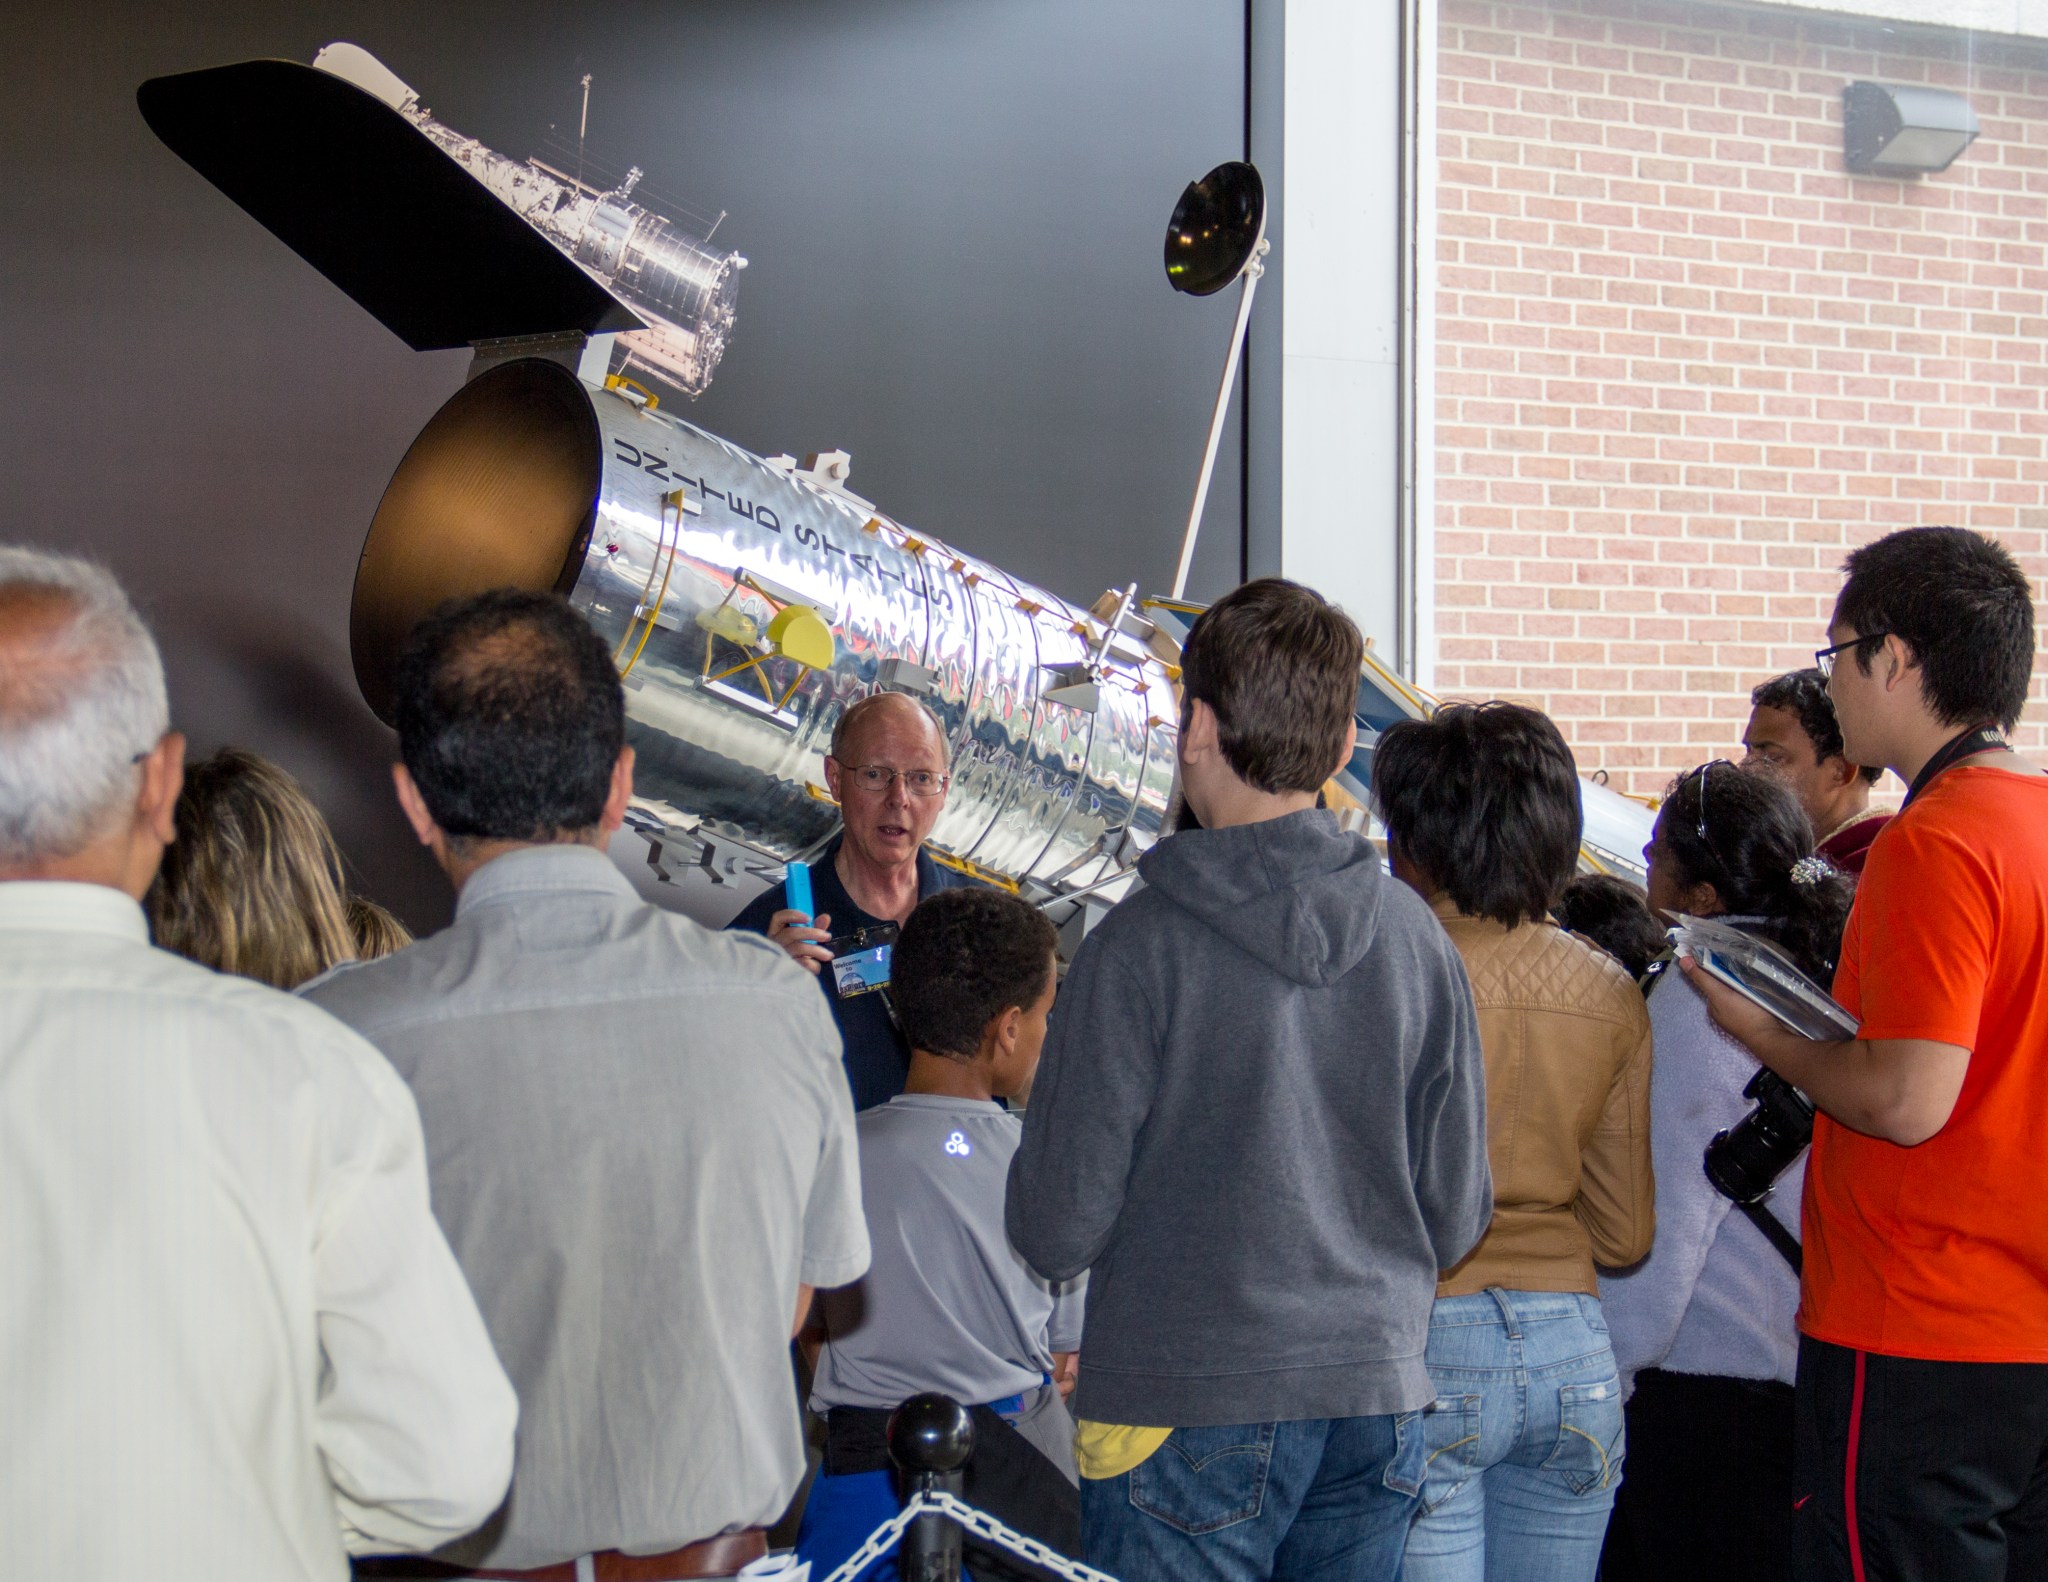 Hartnett talks to the public about Hubble during a Goddard open house.